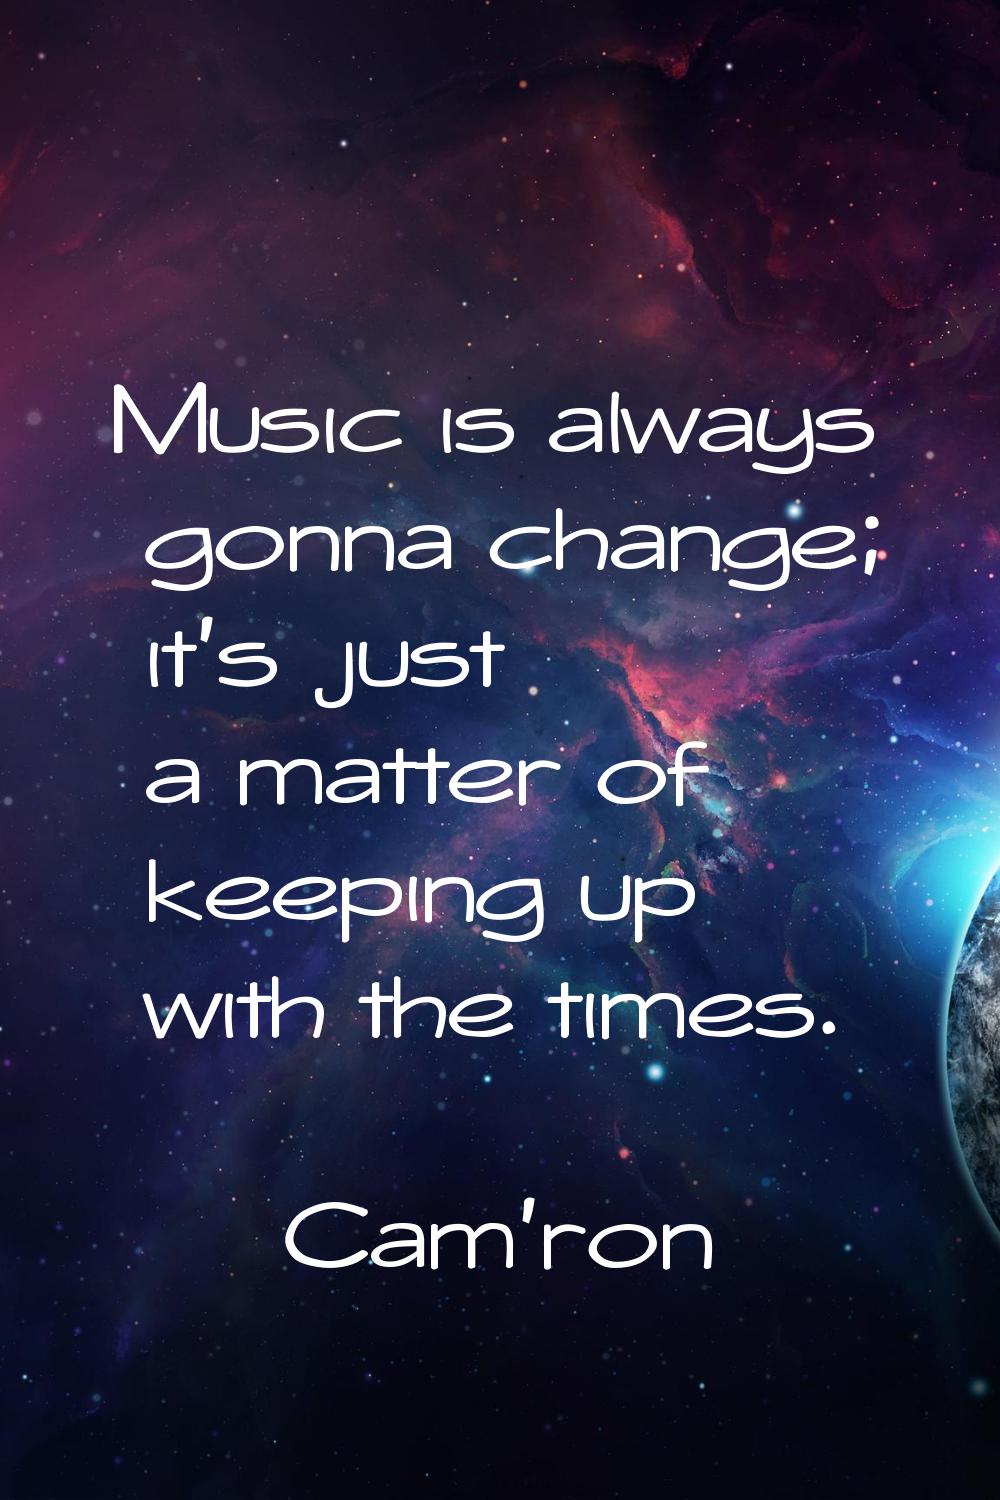 Music is always gonna change; it's just a matter of keeping up with the times.